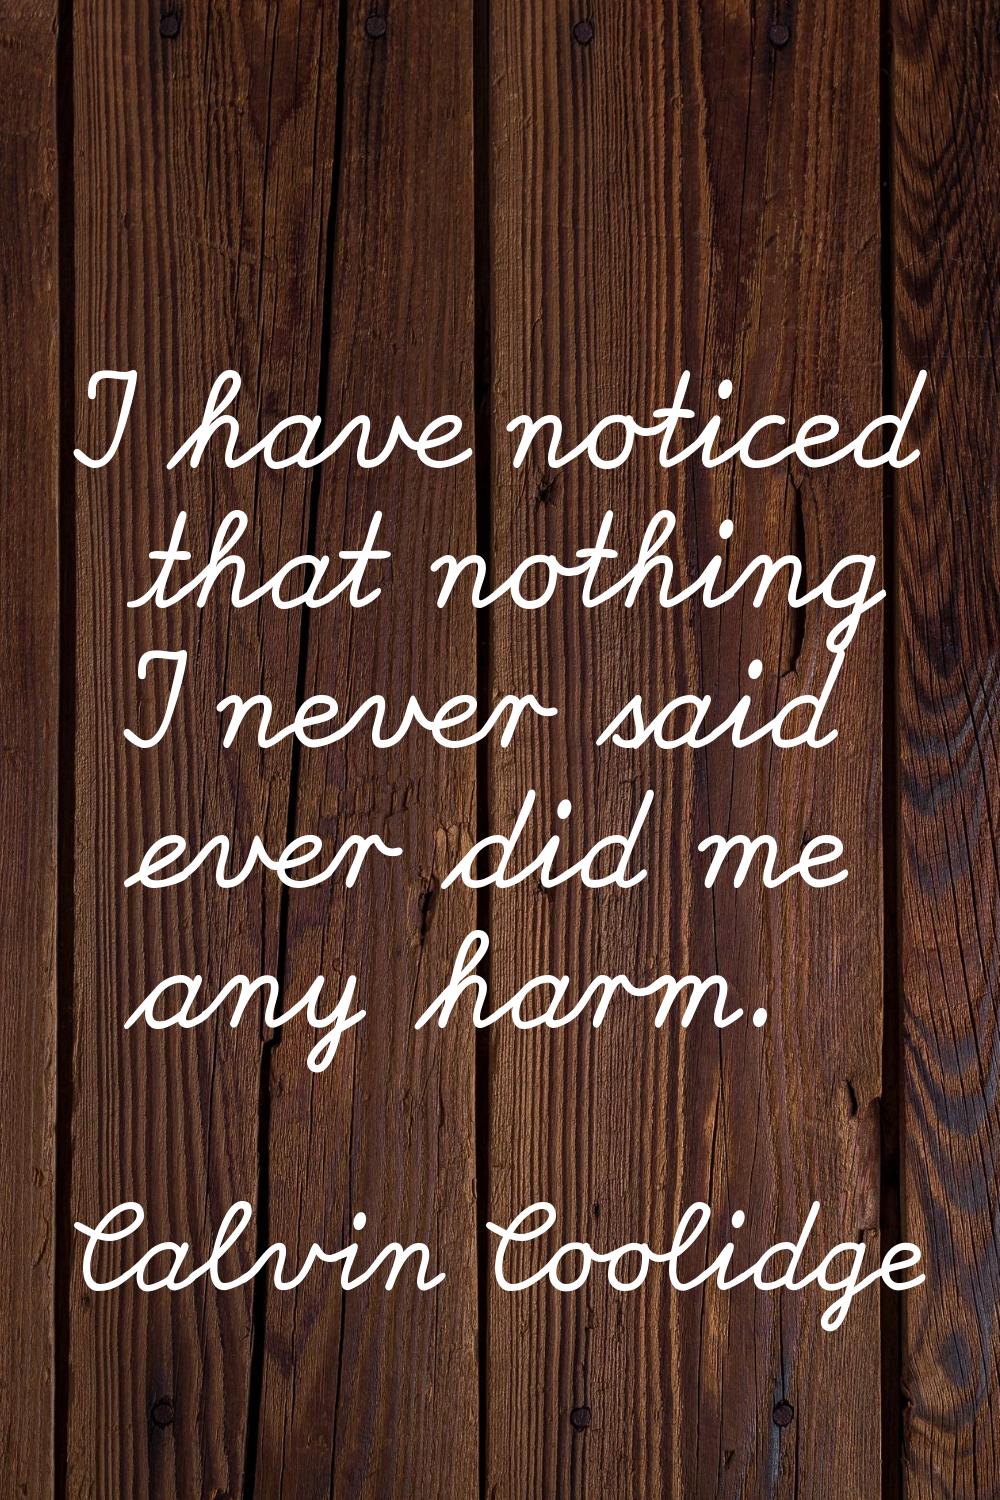 I have noticed that nothing I never said ever did me any harm.